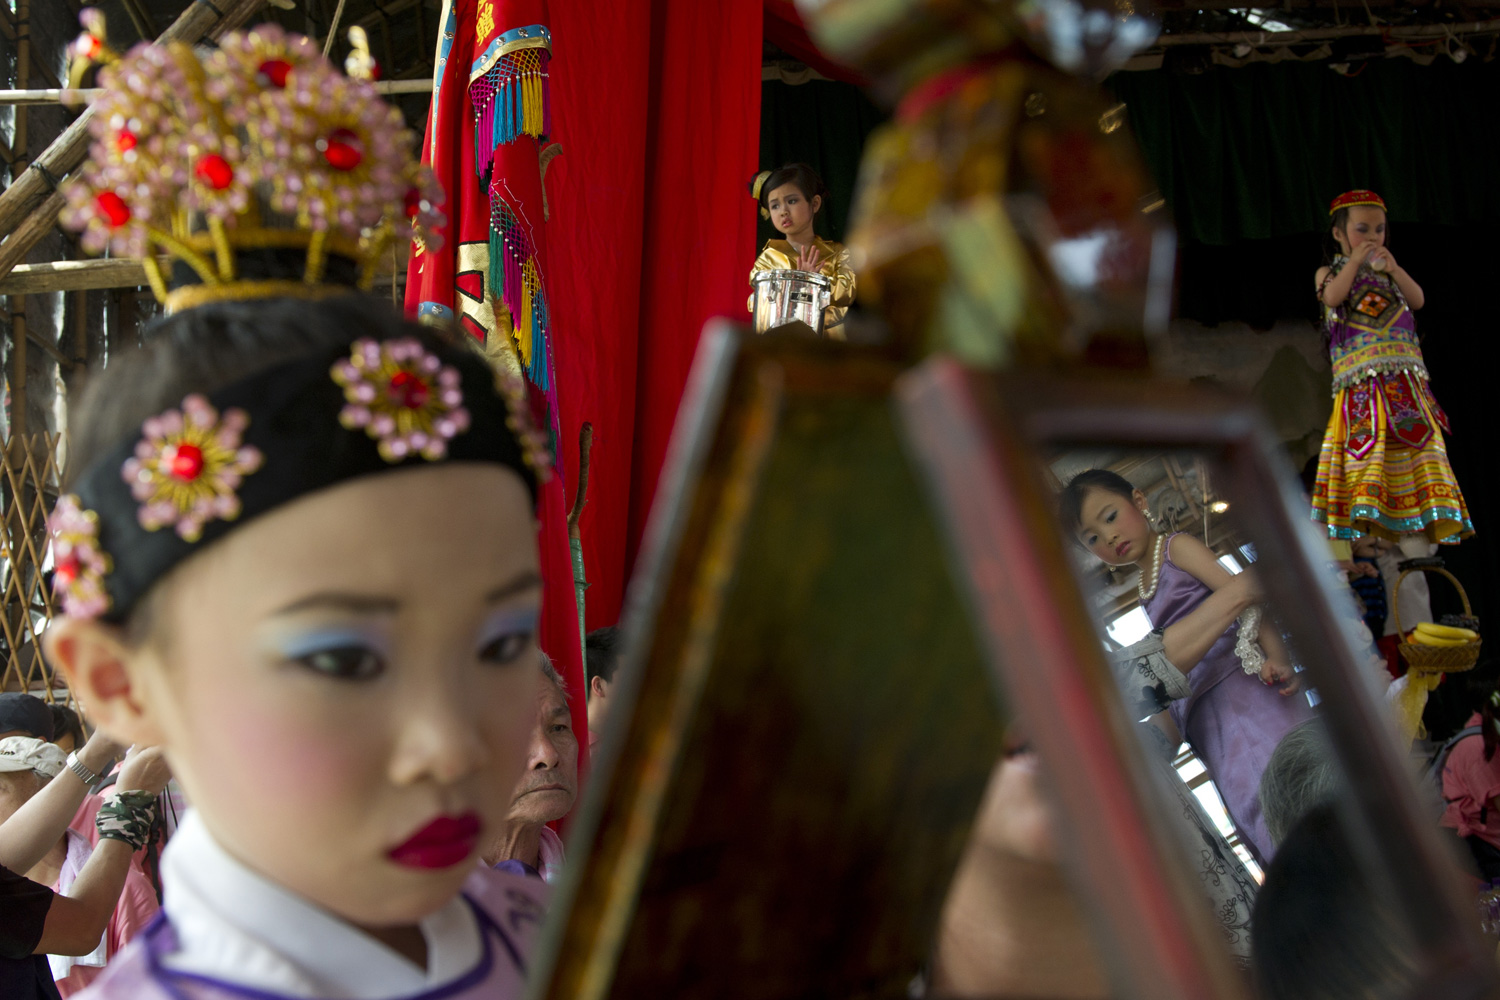 April 28, 2012. Young performers wearing costumes and make-up participate in the Bun Festival parade on Hong Kong's Cheung Chau Island.